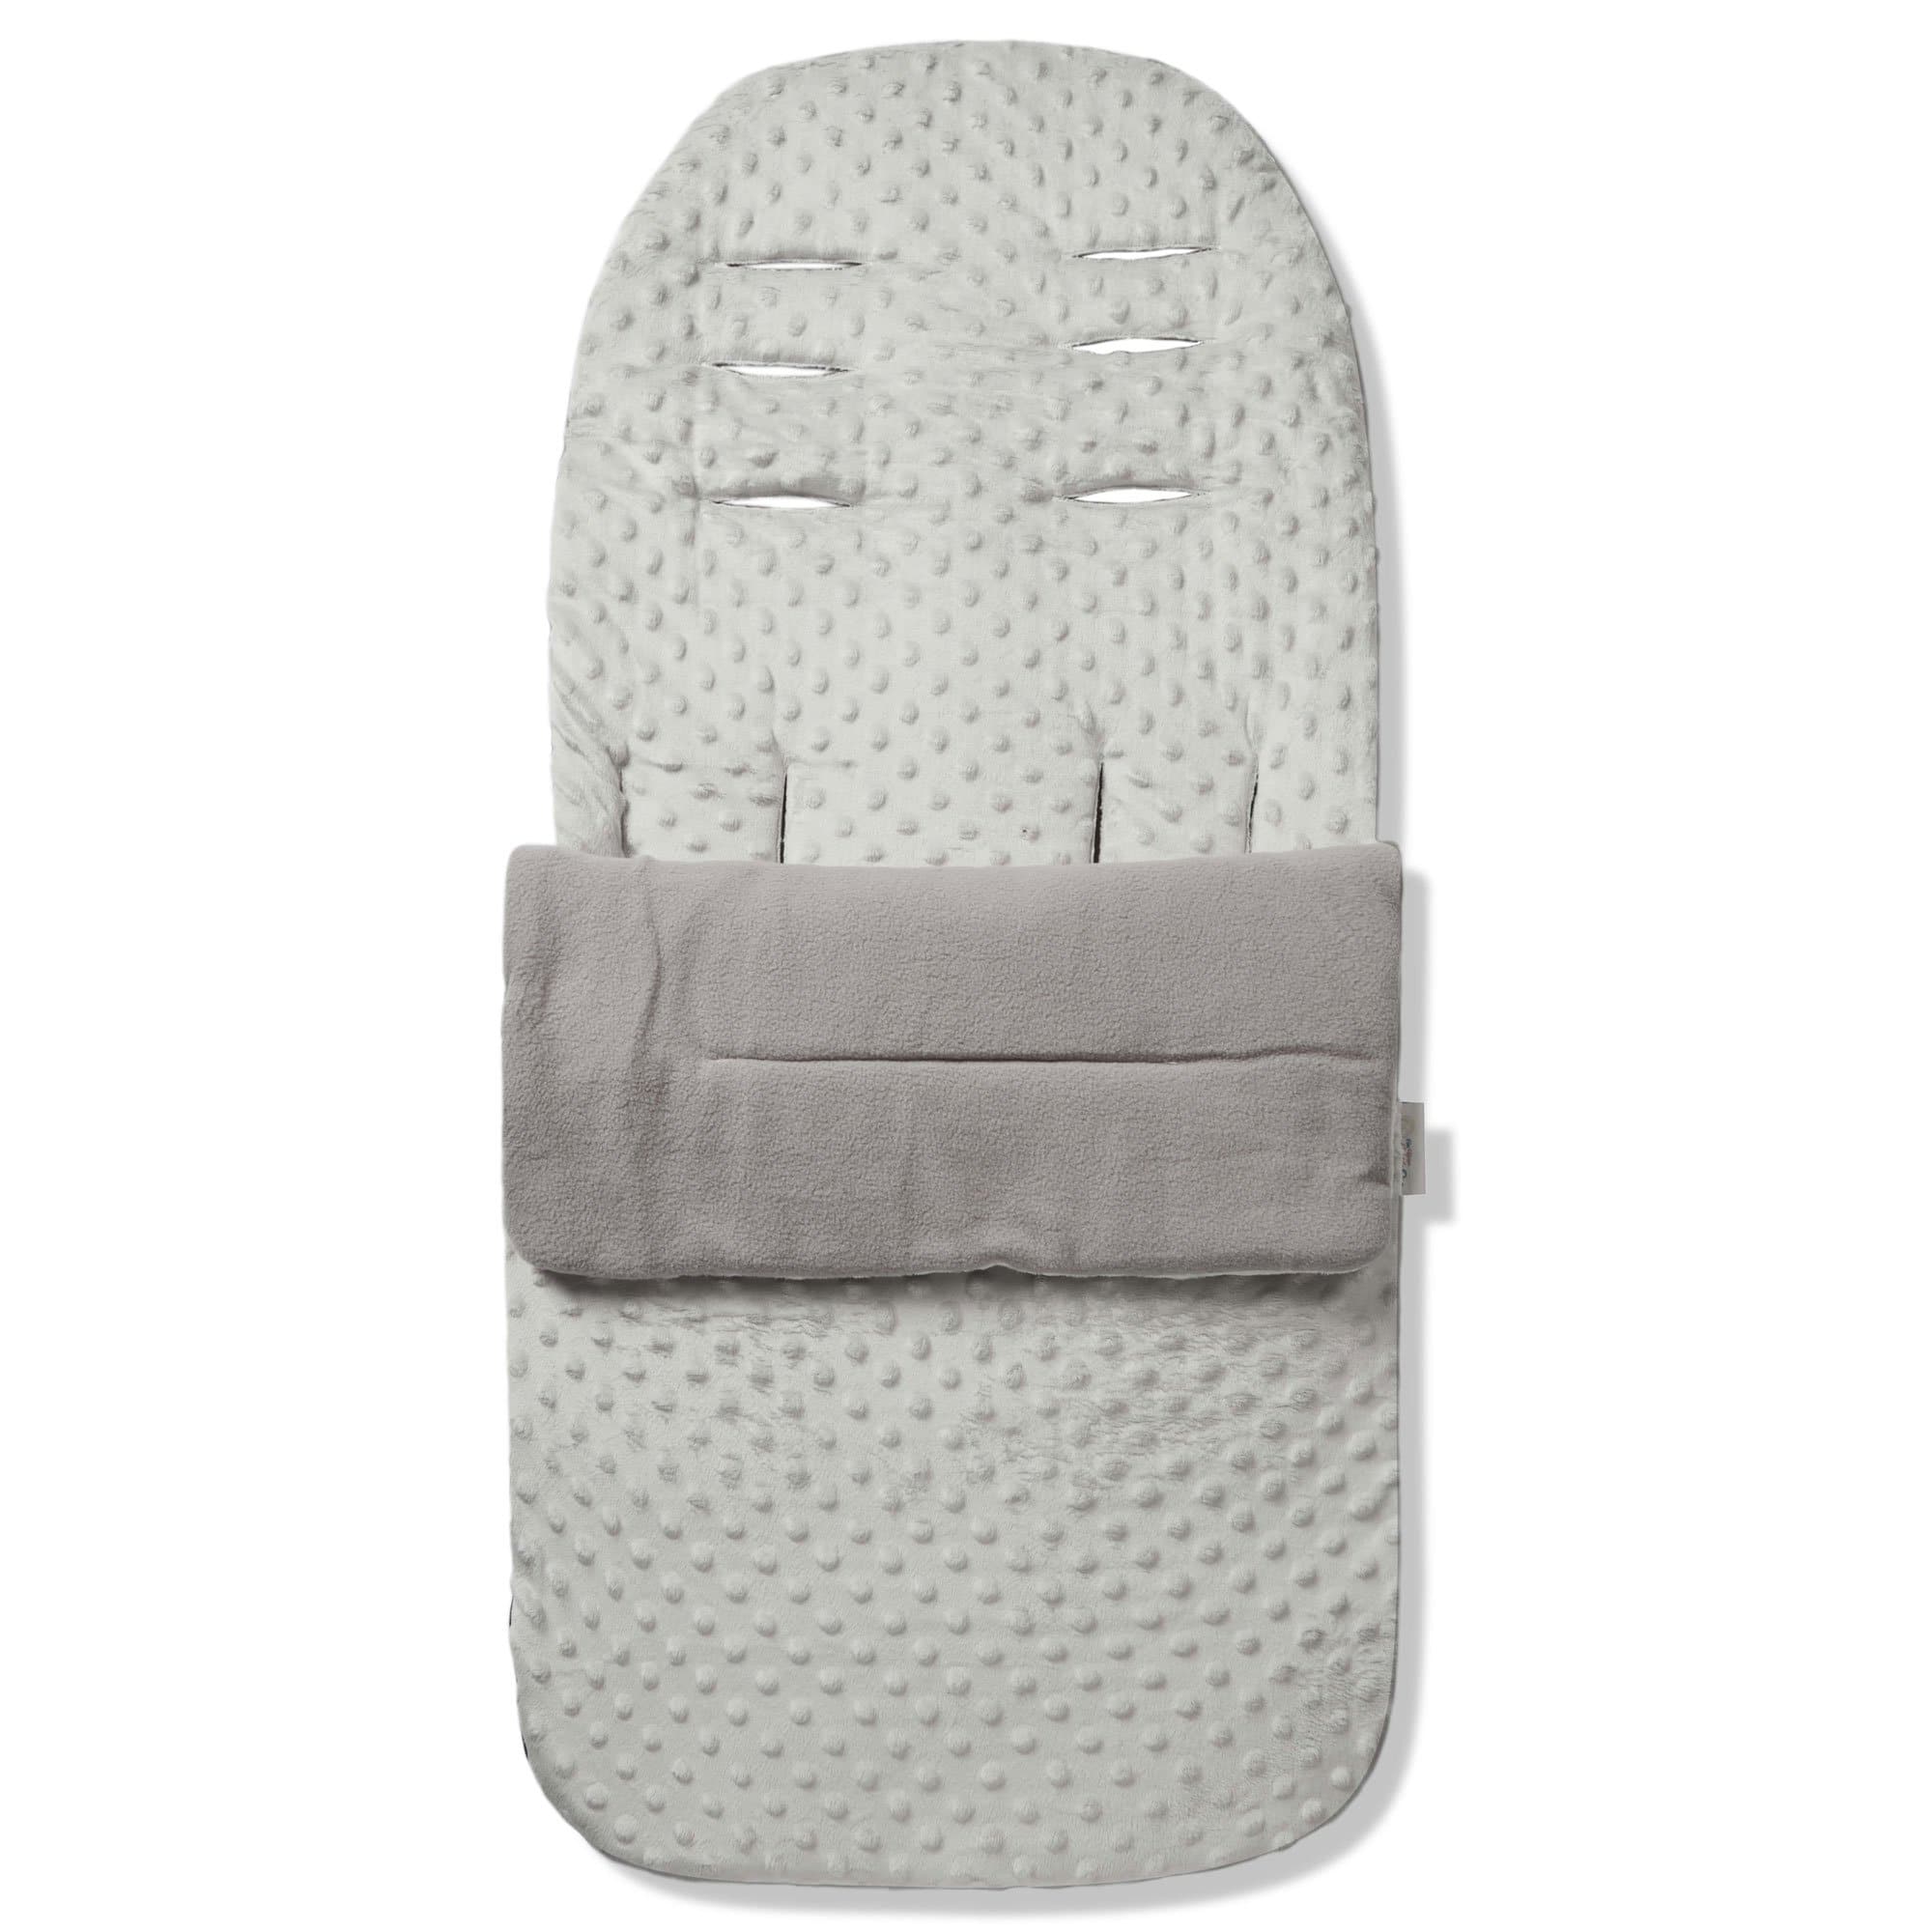 Dimple Footmuff / Cosy Toes Compatible with Baby Weavers - For Your Little One